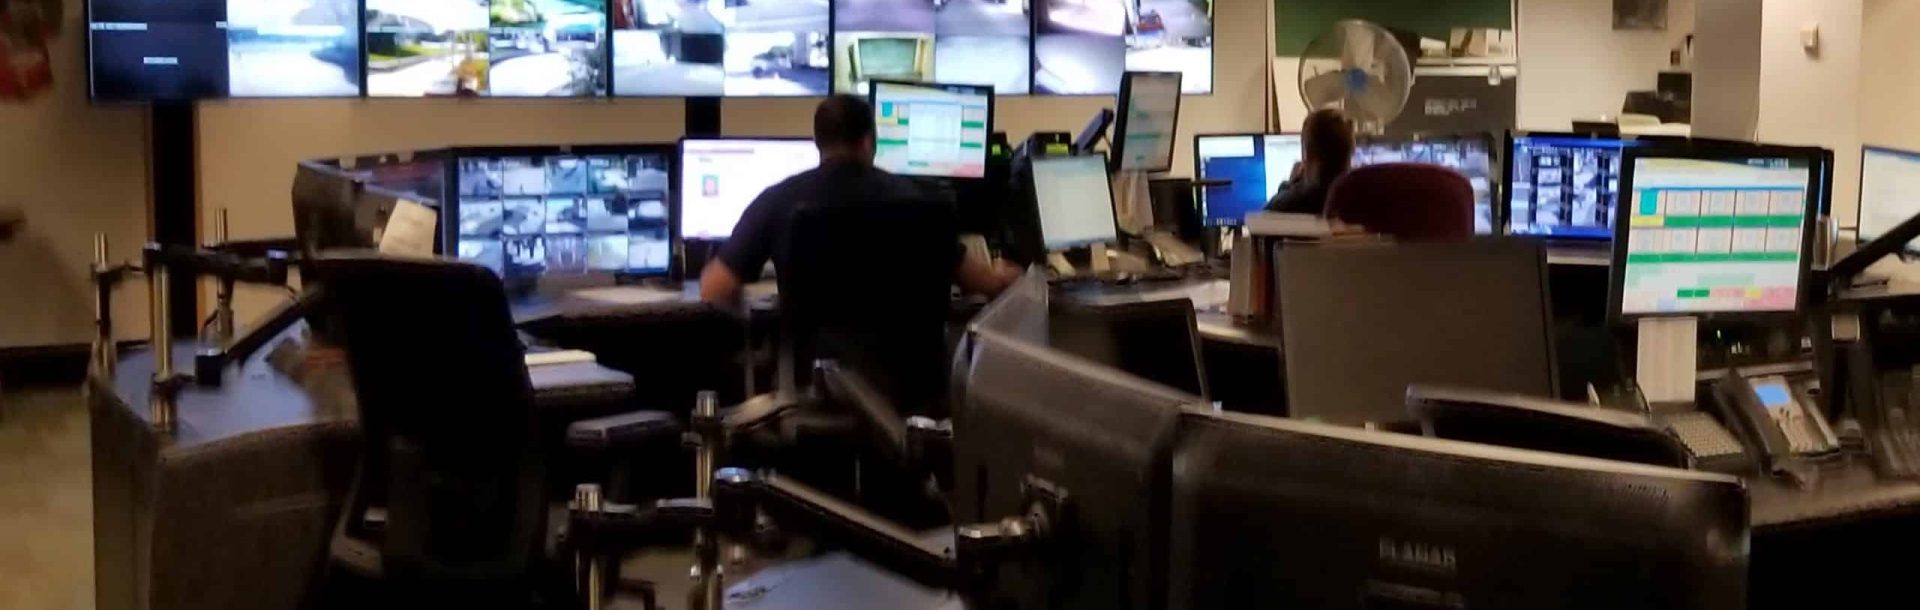 Police Command Center Crop